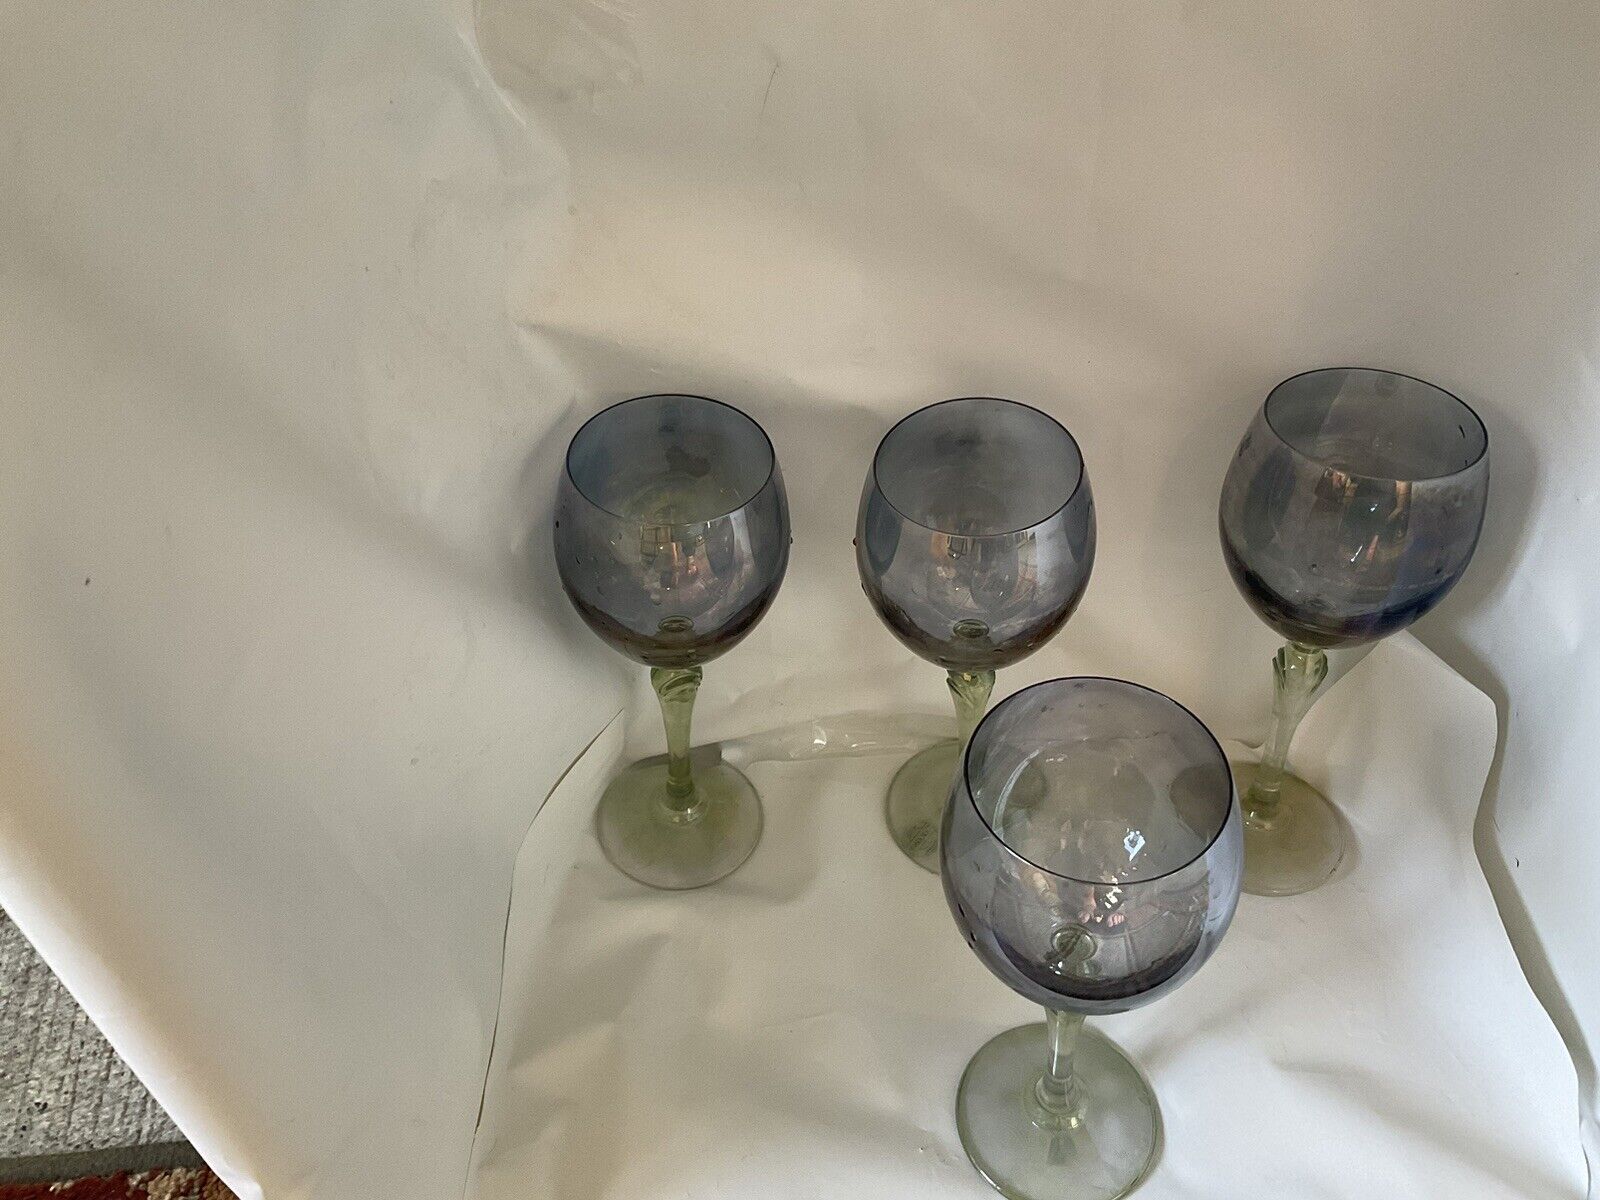 4 Gorgeous Colony Wine Glasses. Iridescent Purple With Green Stems . Rare Find